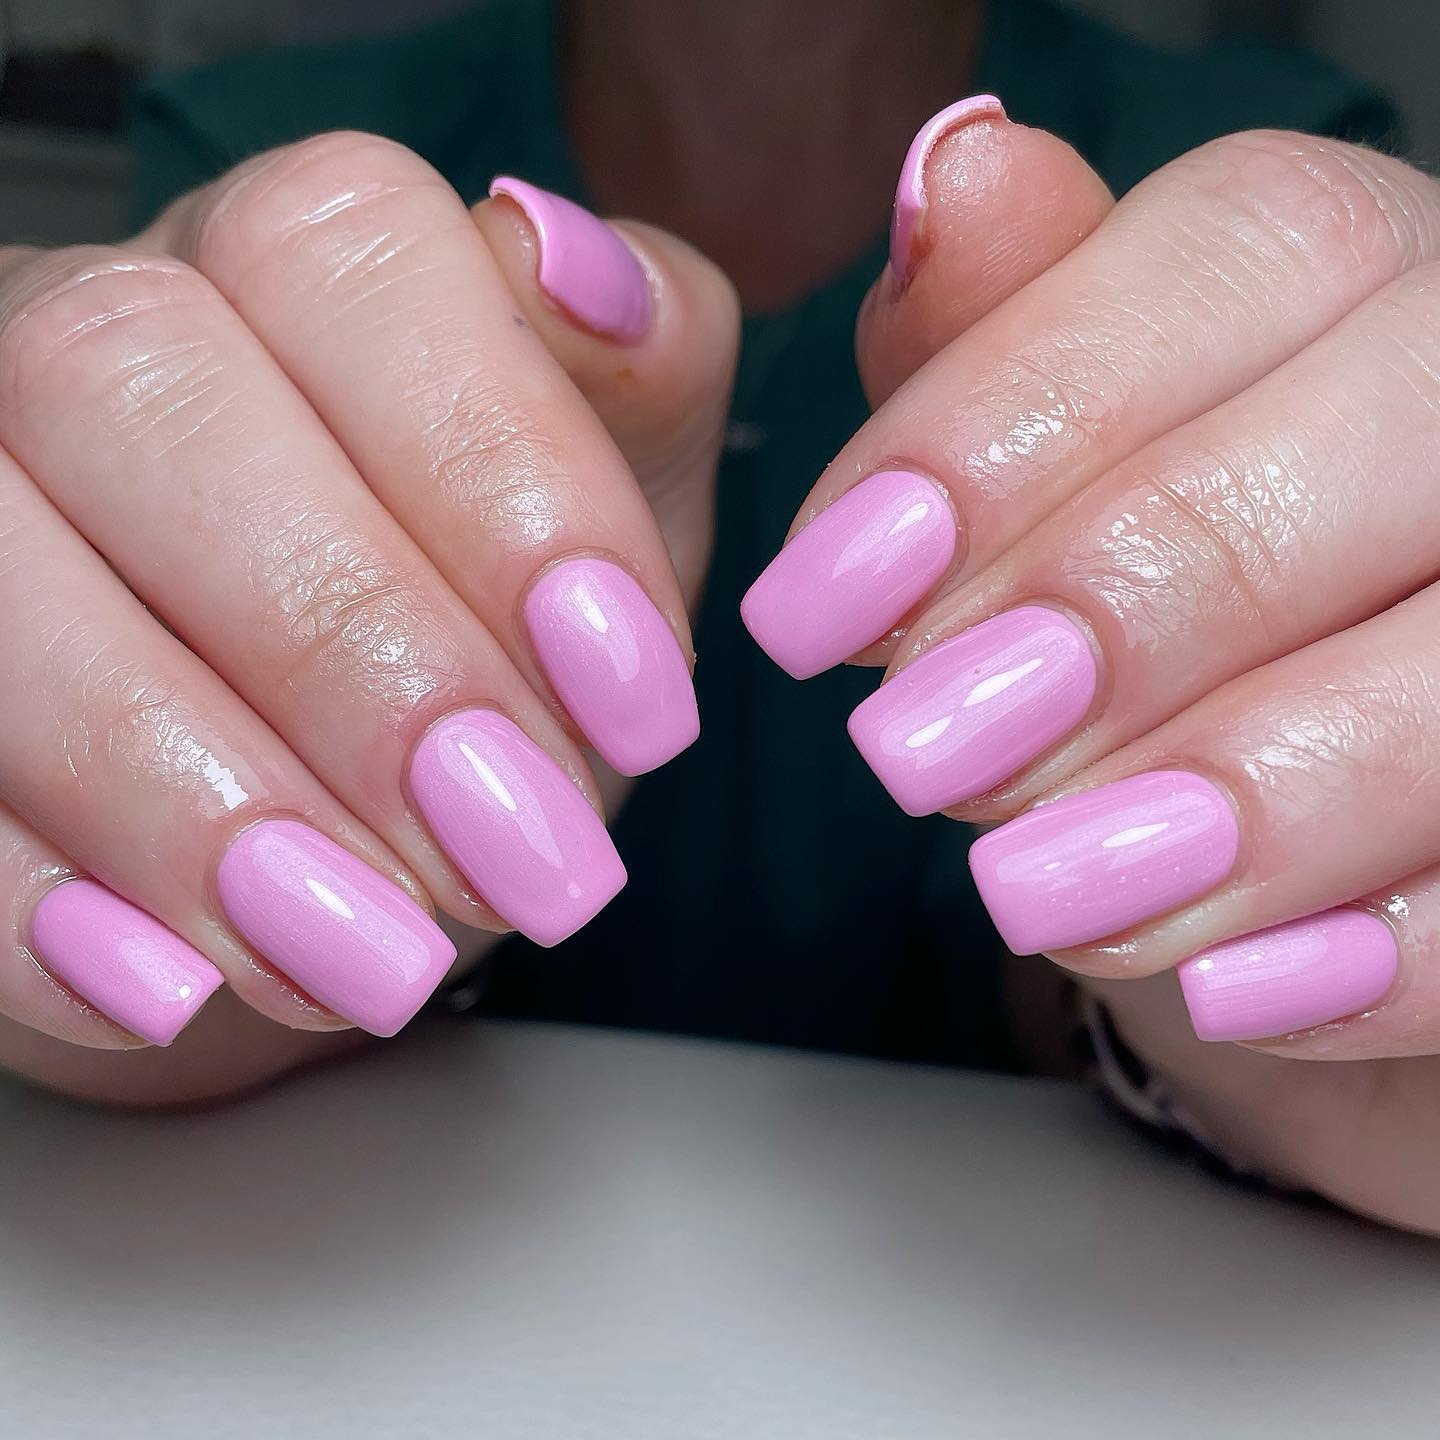 If you prefer and want a lighter shade of pink consider this bubblegum manicure.